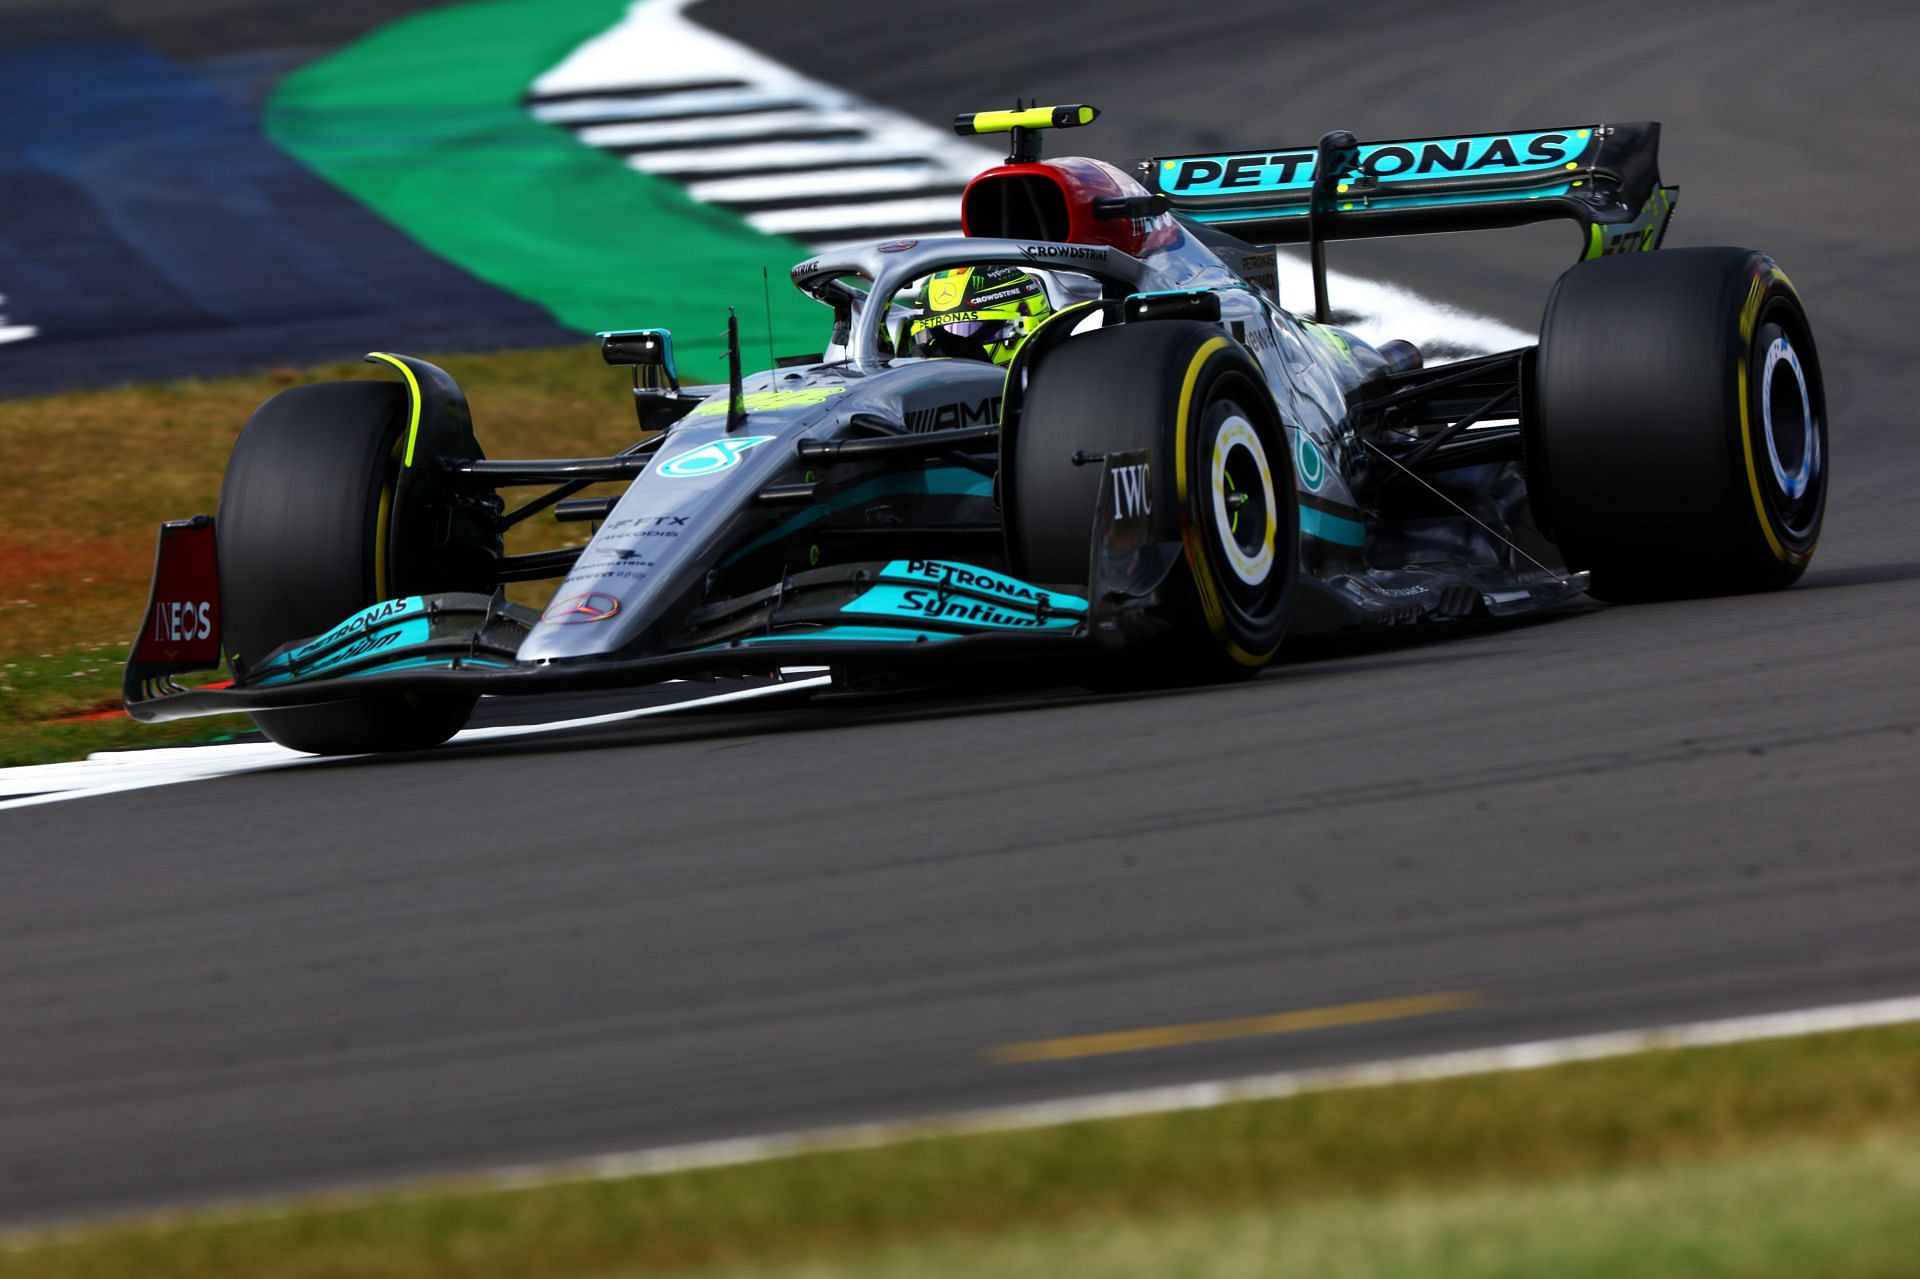 Mercedes has brought a heavily upgraded car to the 2022 F1 British GP